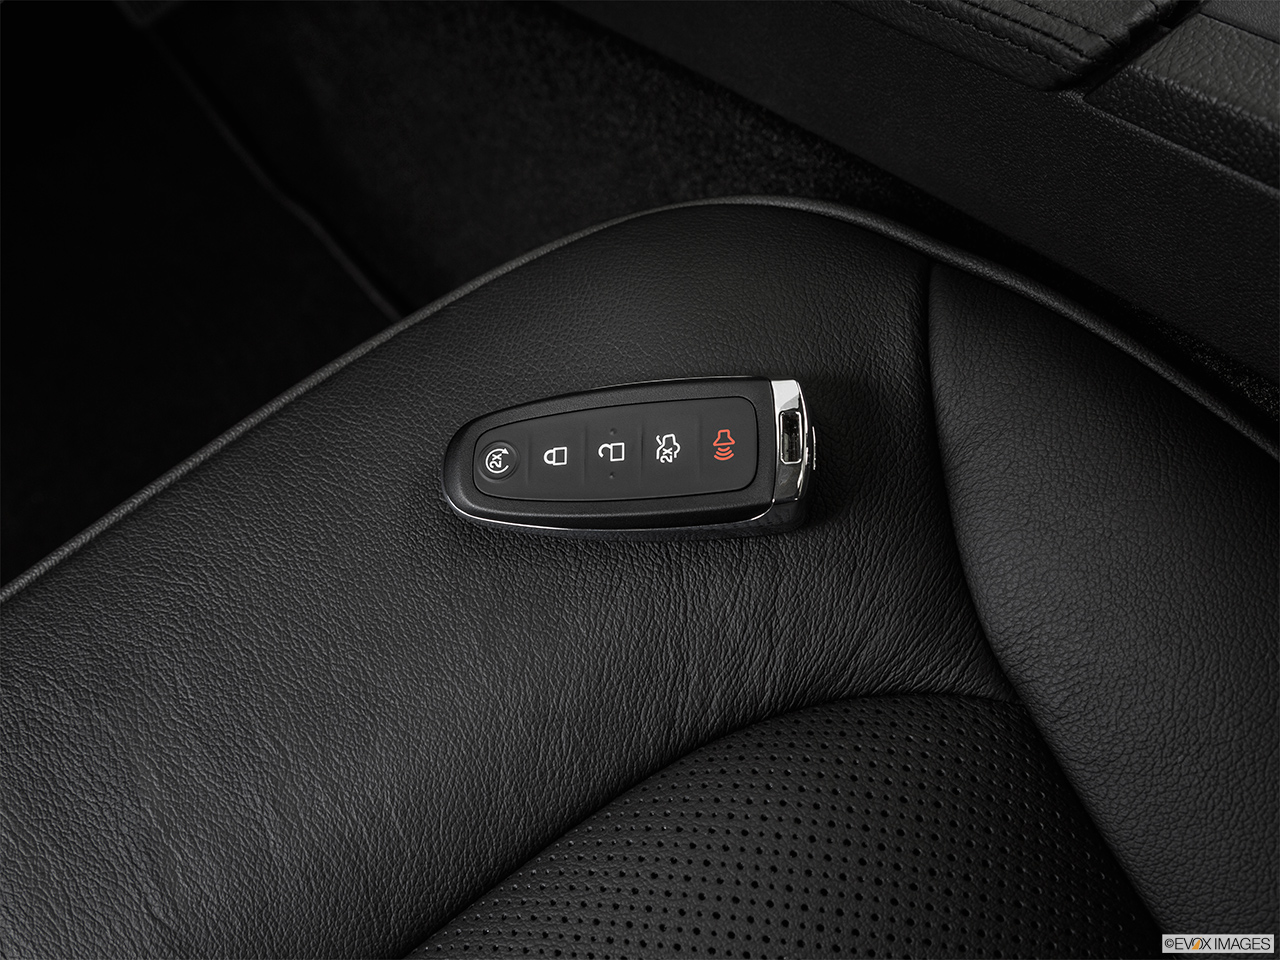 2015 Lincoln MKX FWD Key fob on driver's seat. 